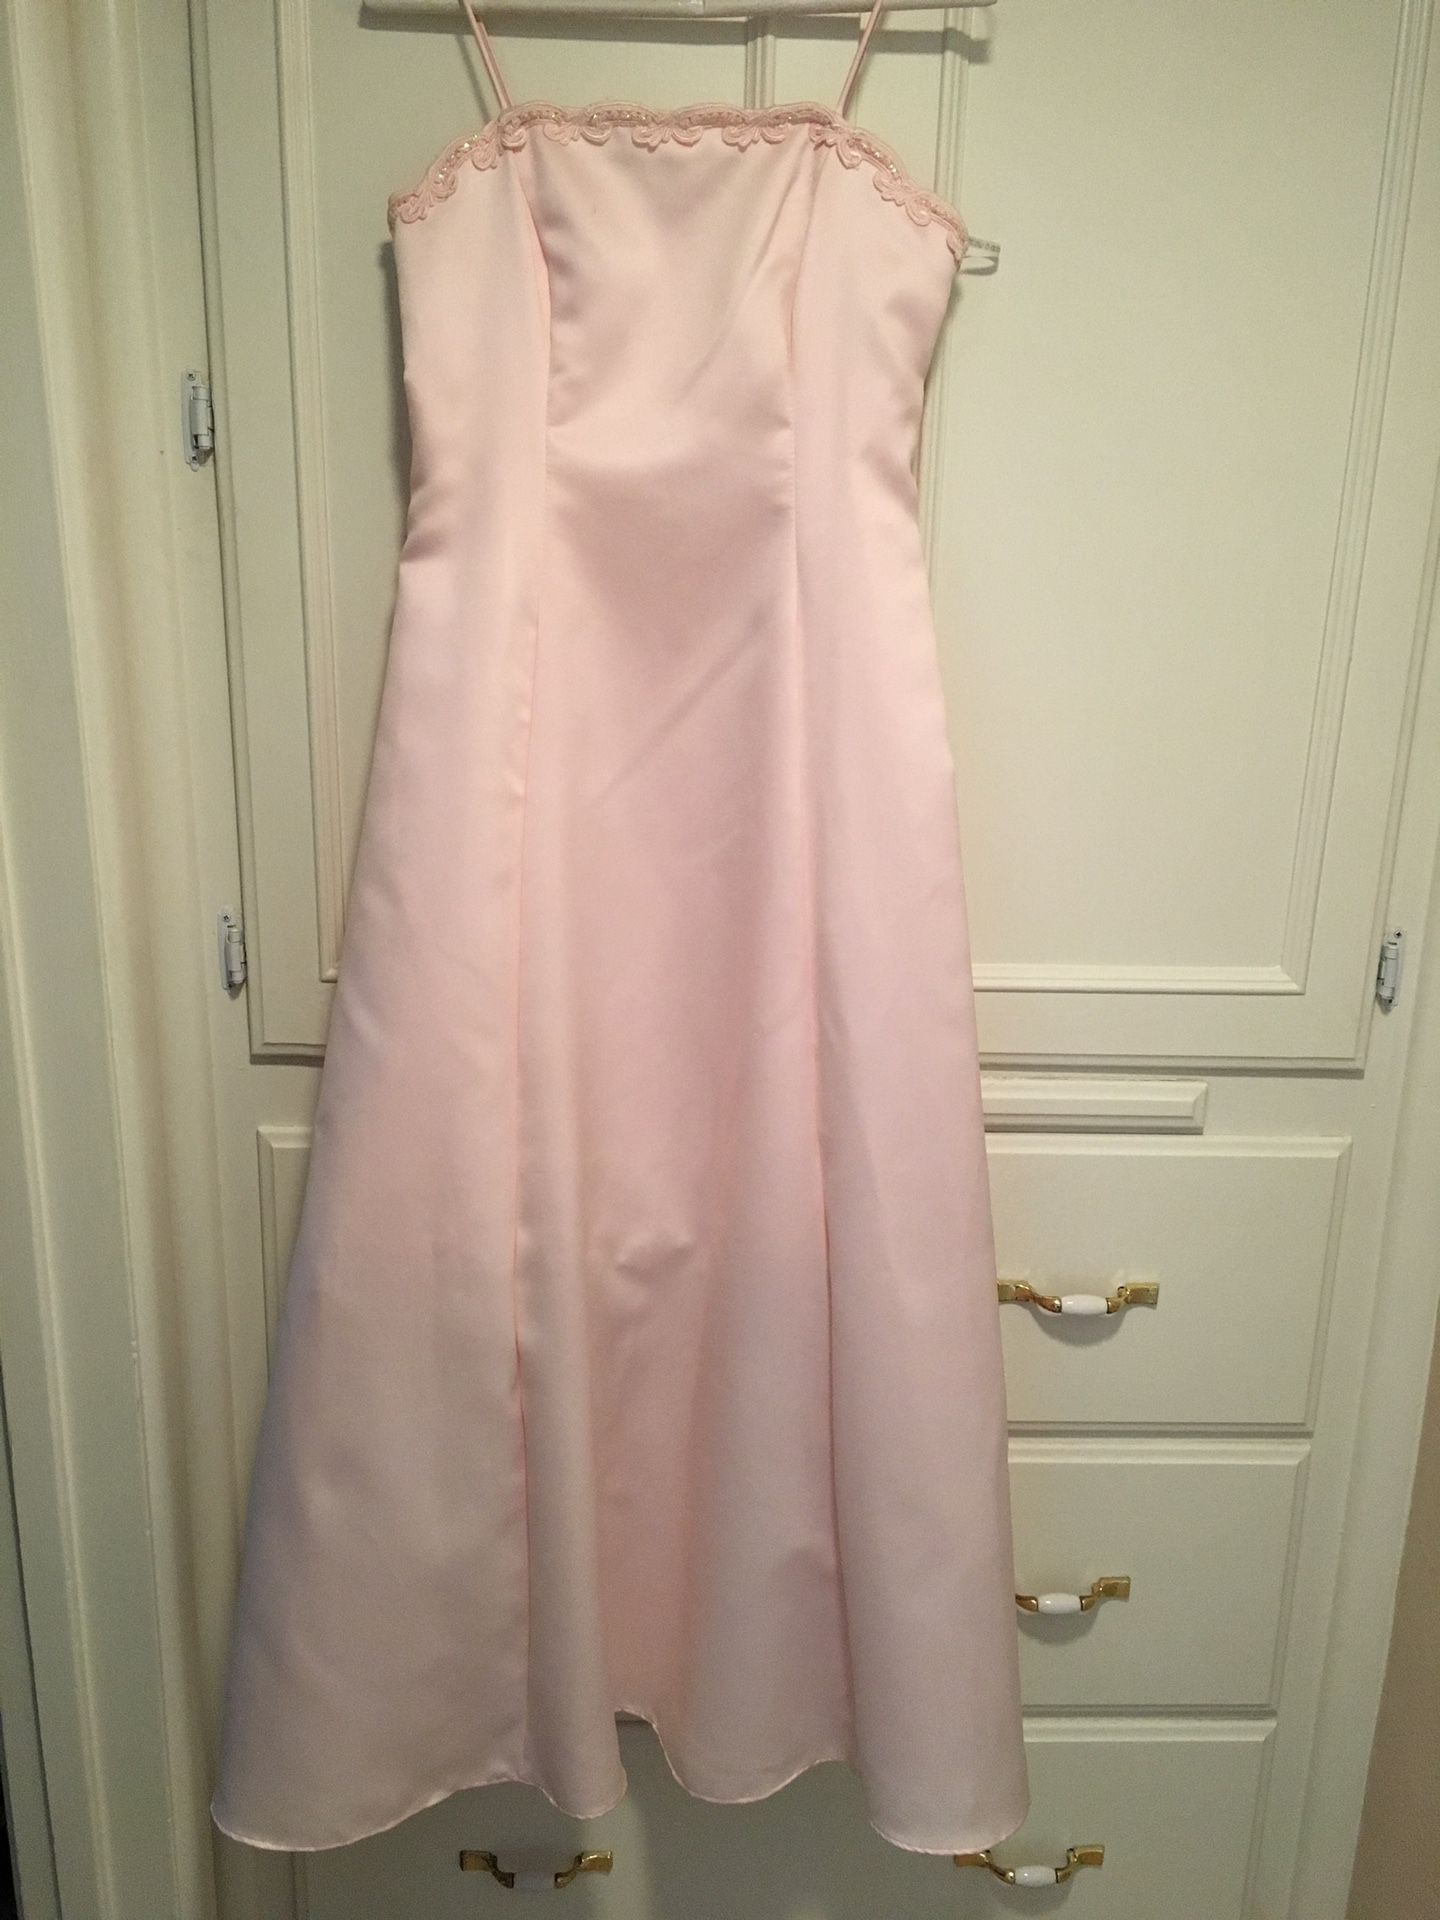 Teenager/woman’s pink satin dress/sequins along the top size 6